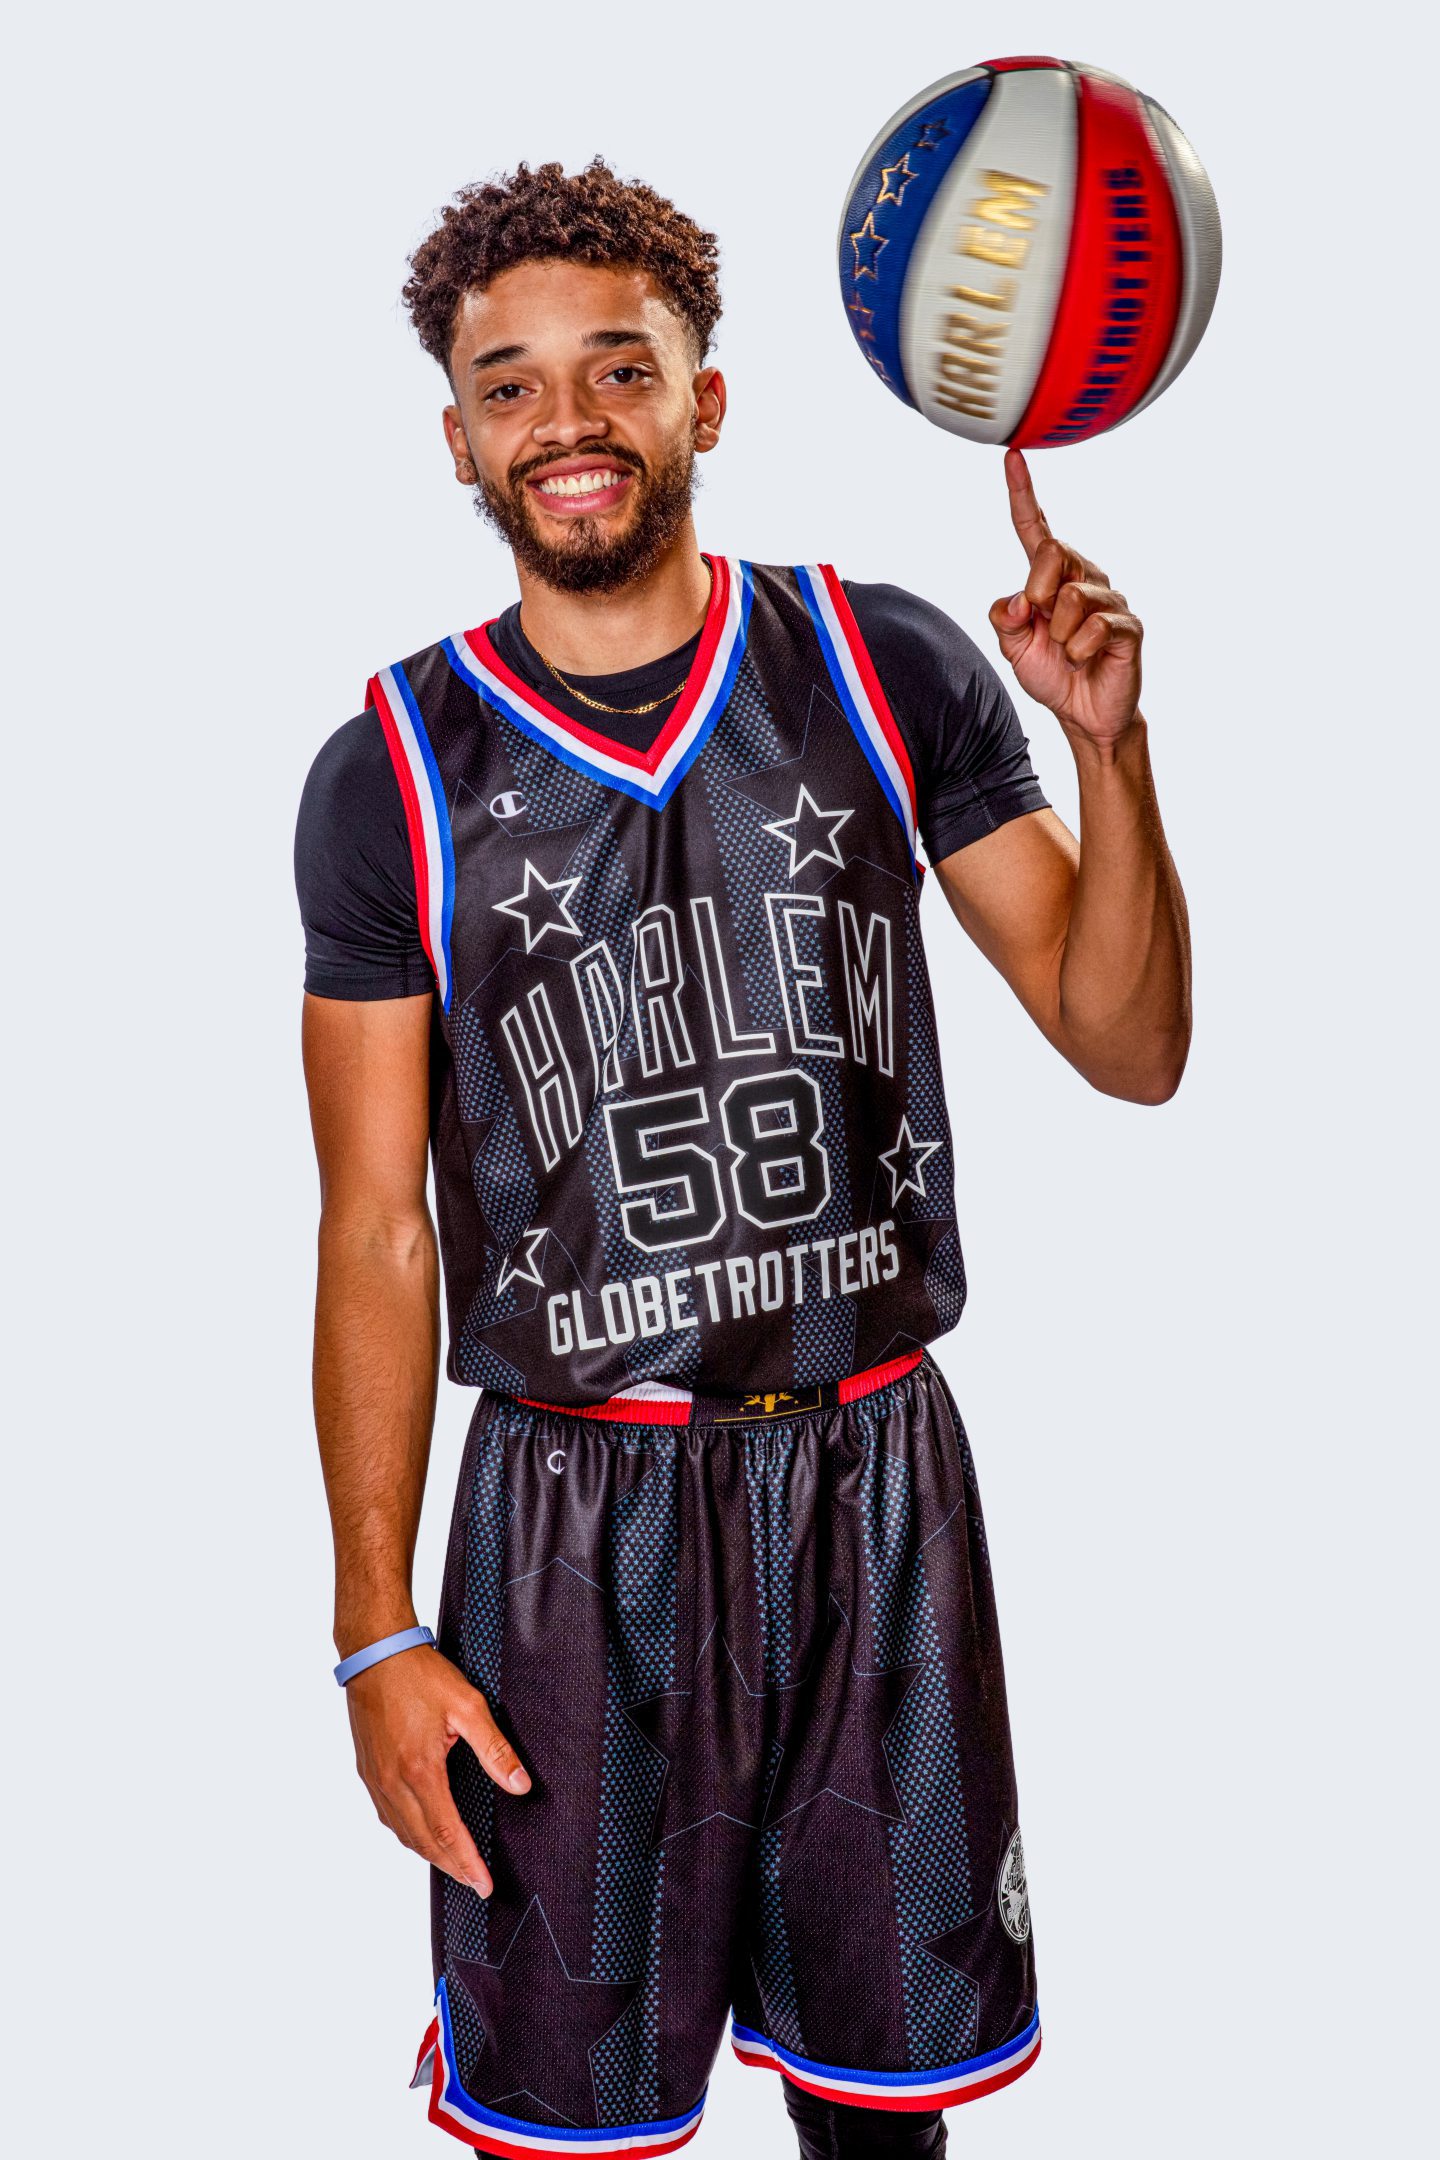 Maxwell 'Hops' Pearce from Harlem Globetrotters. 